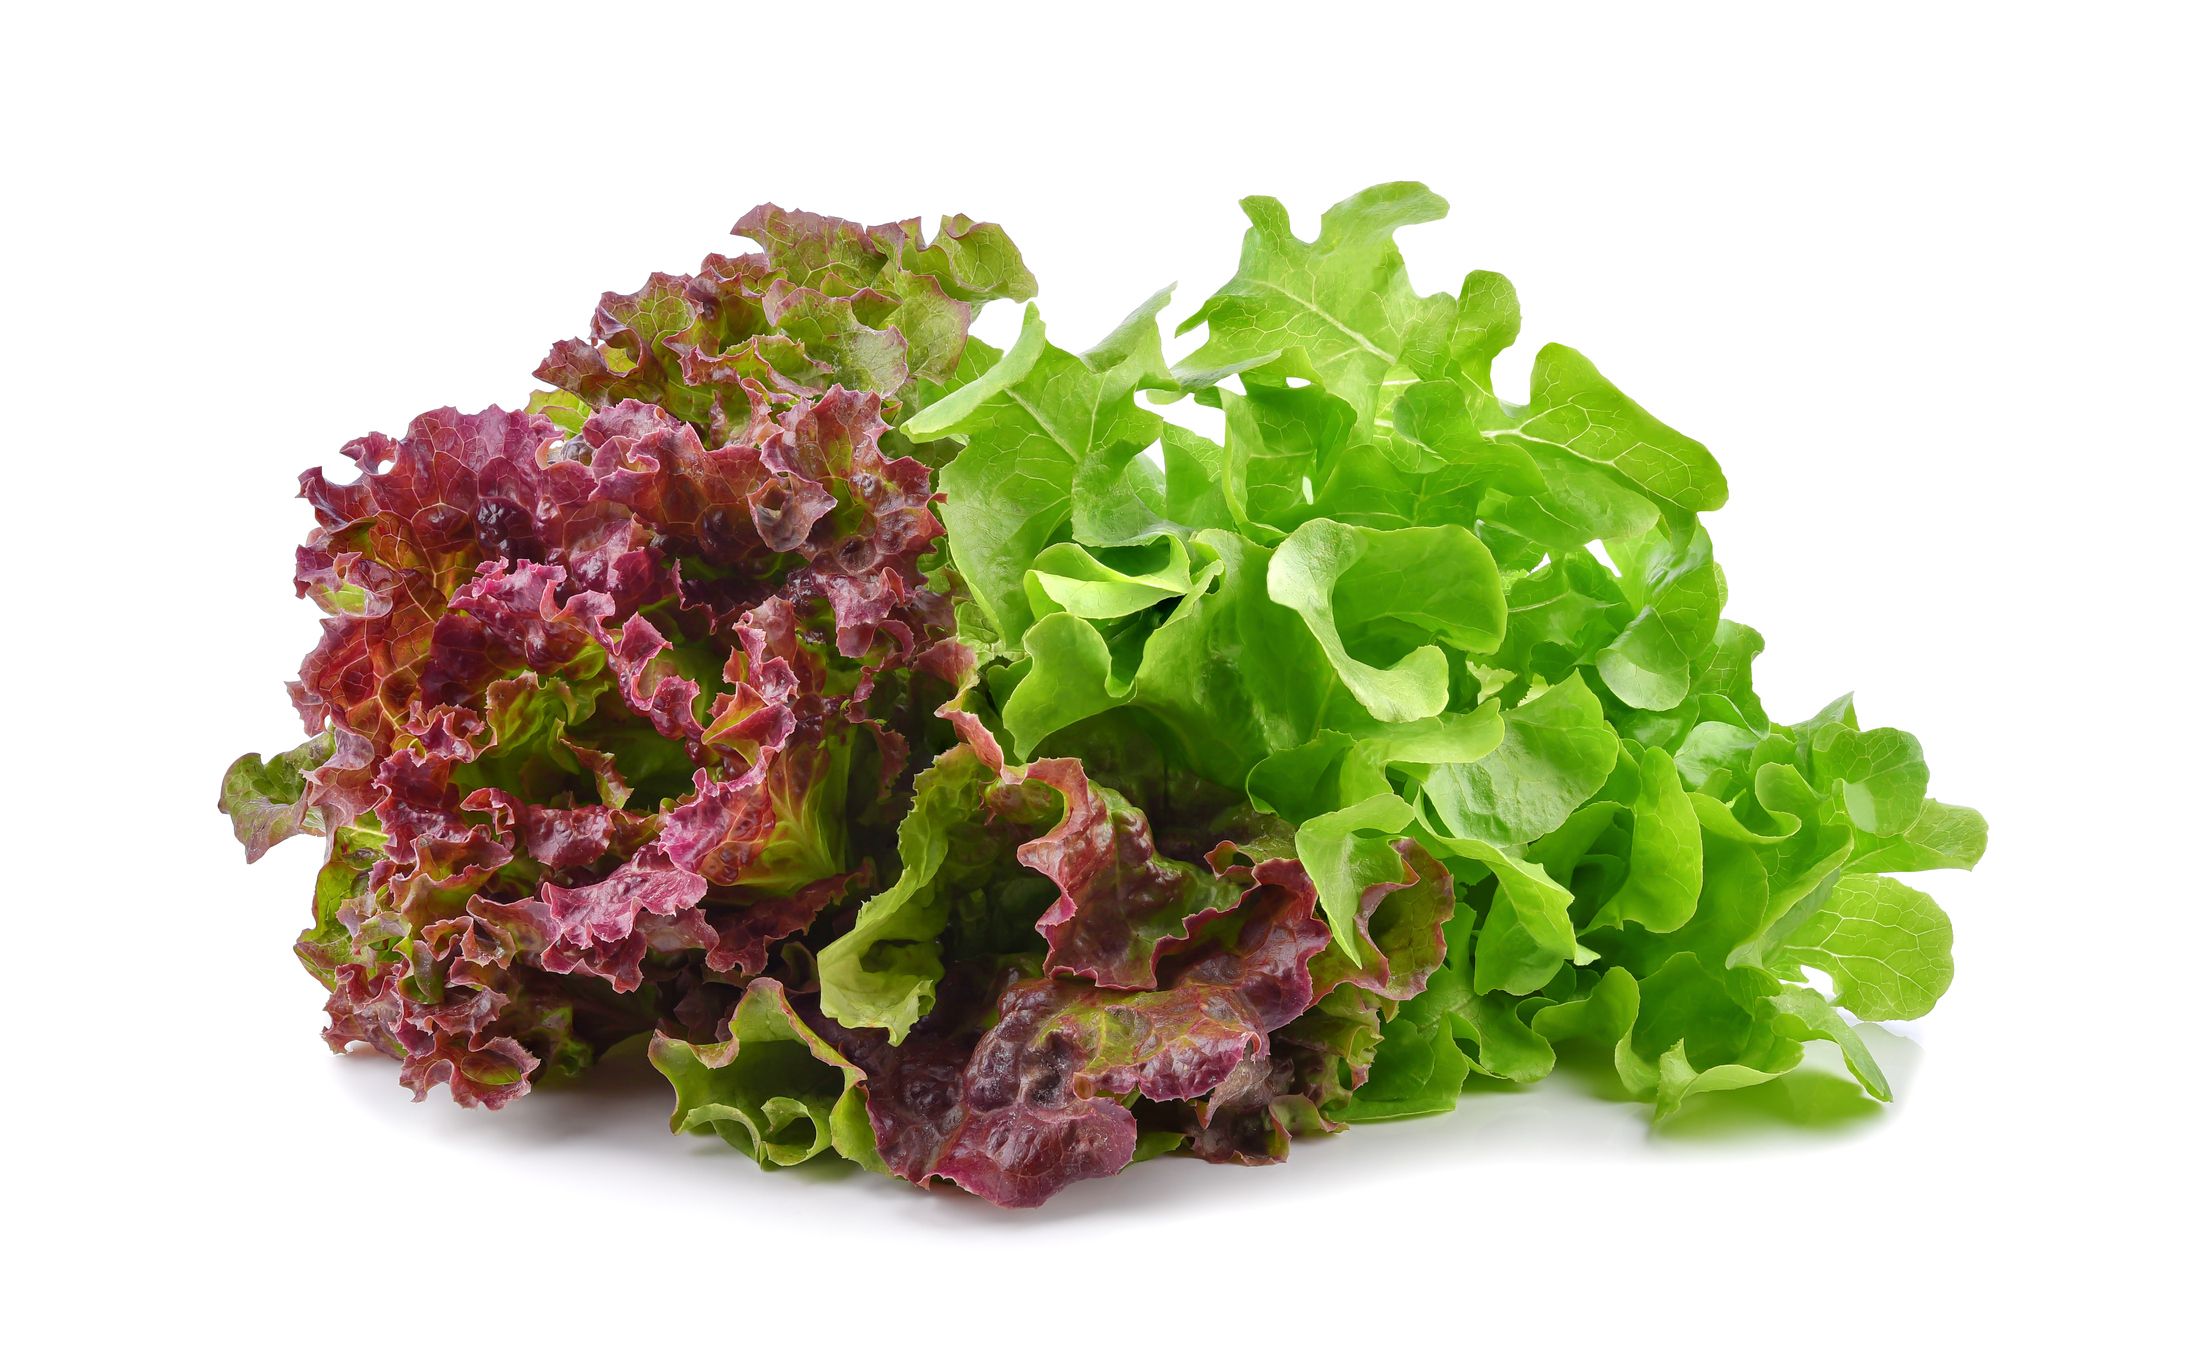 16 Types Of Lettuce And How To Use Them - Lettuce Varieties